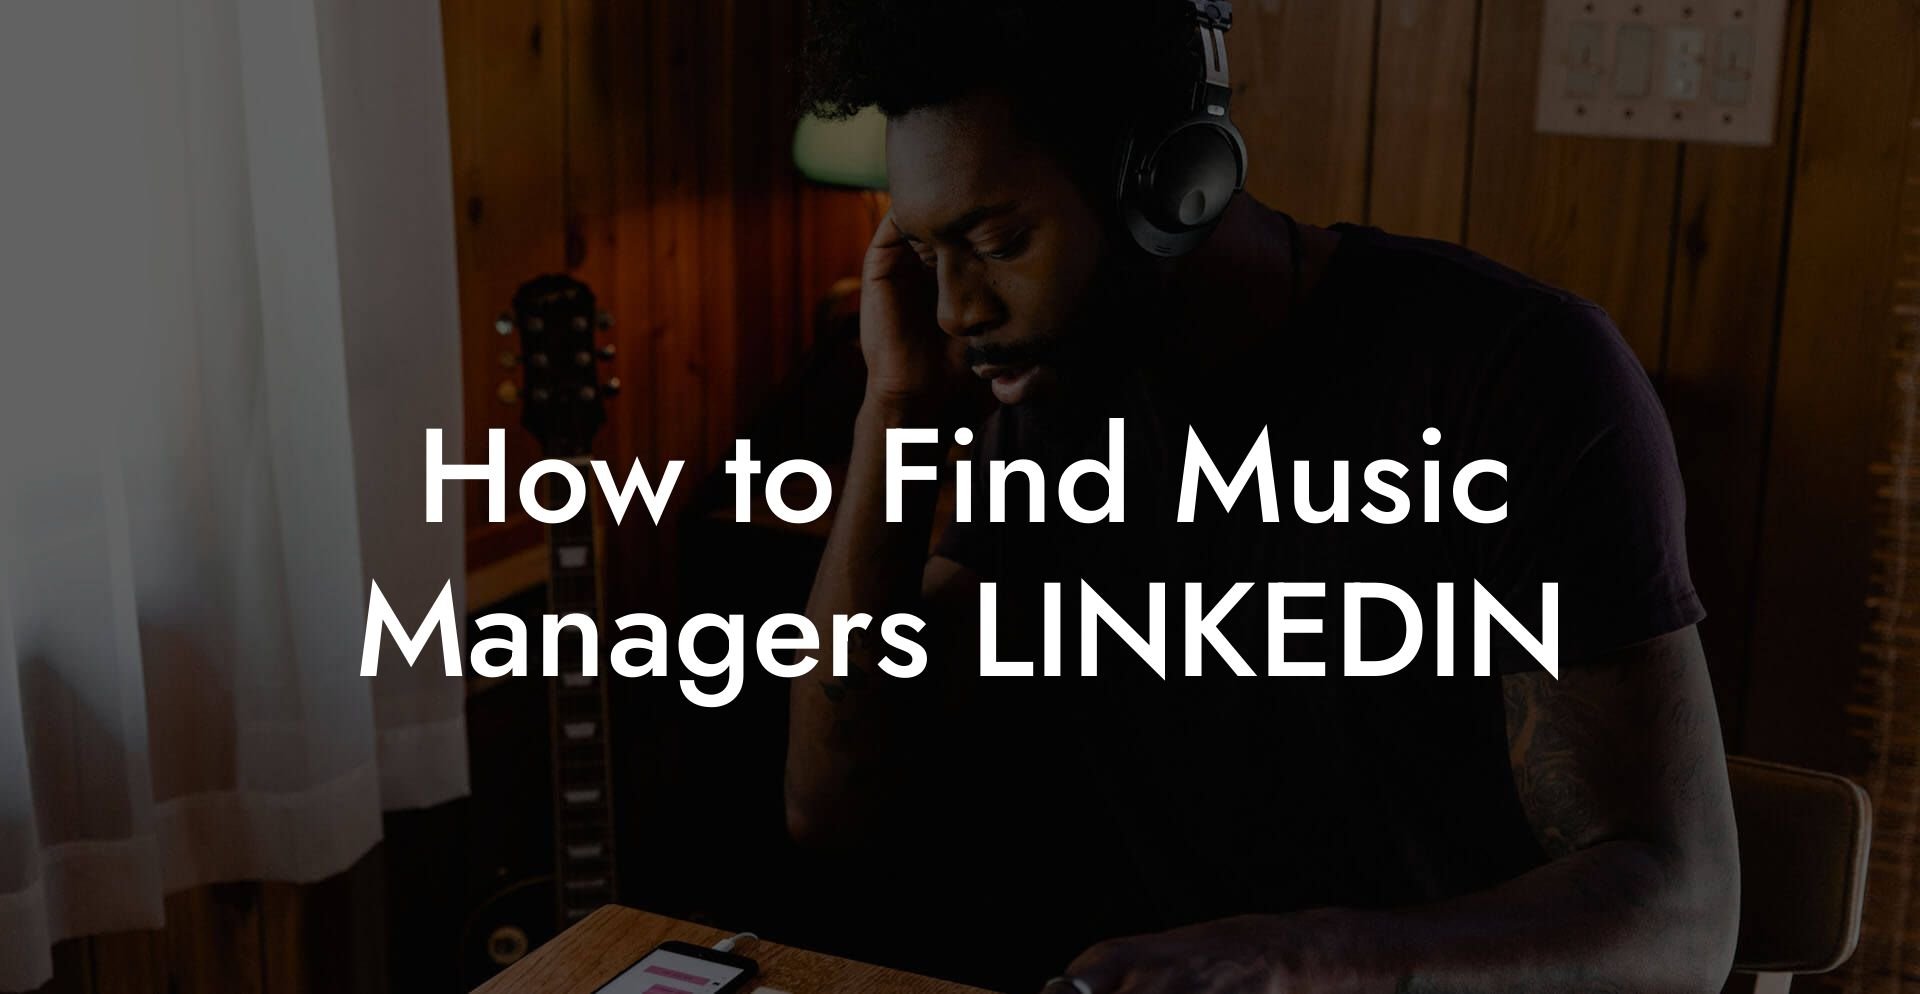 How to Find Music Managers LINKEDIN